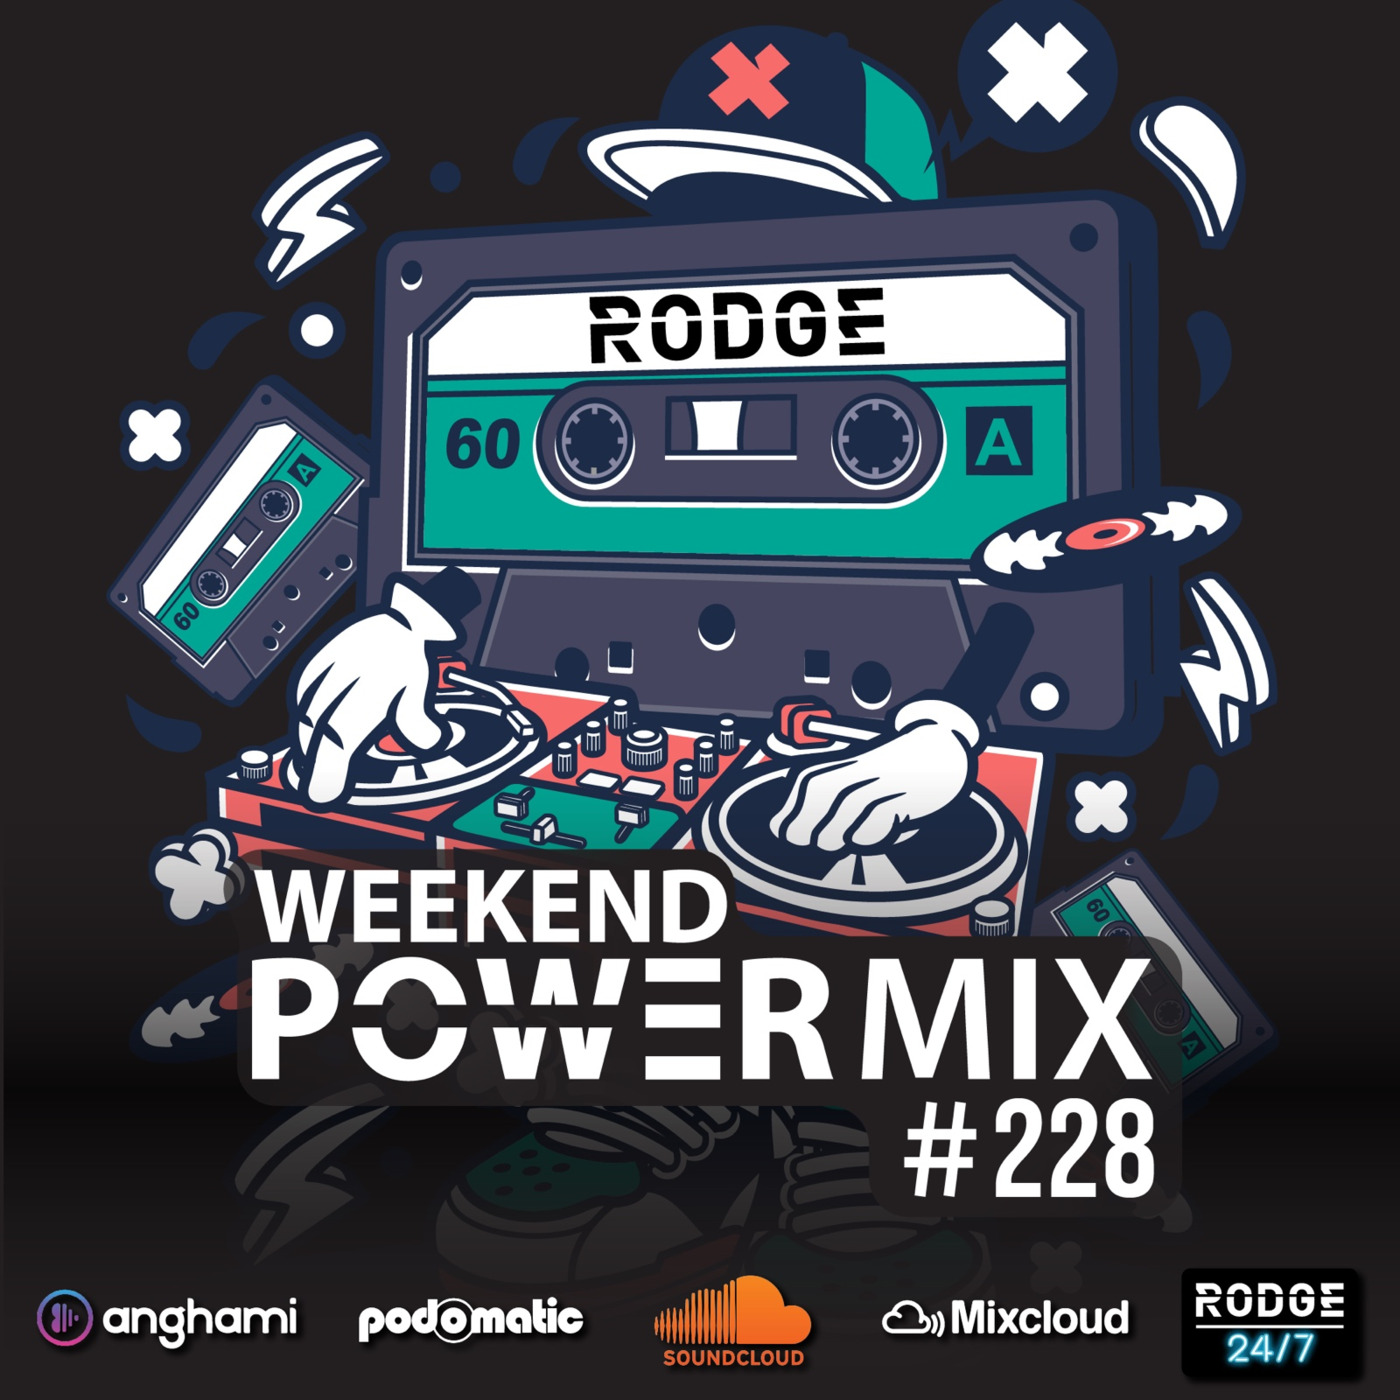 Episode 228: Rodge - WPM (Weekend Power Mix) # 228